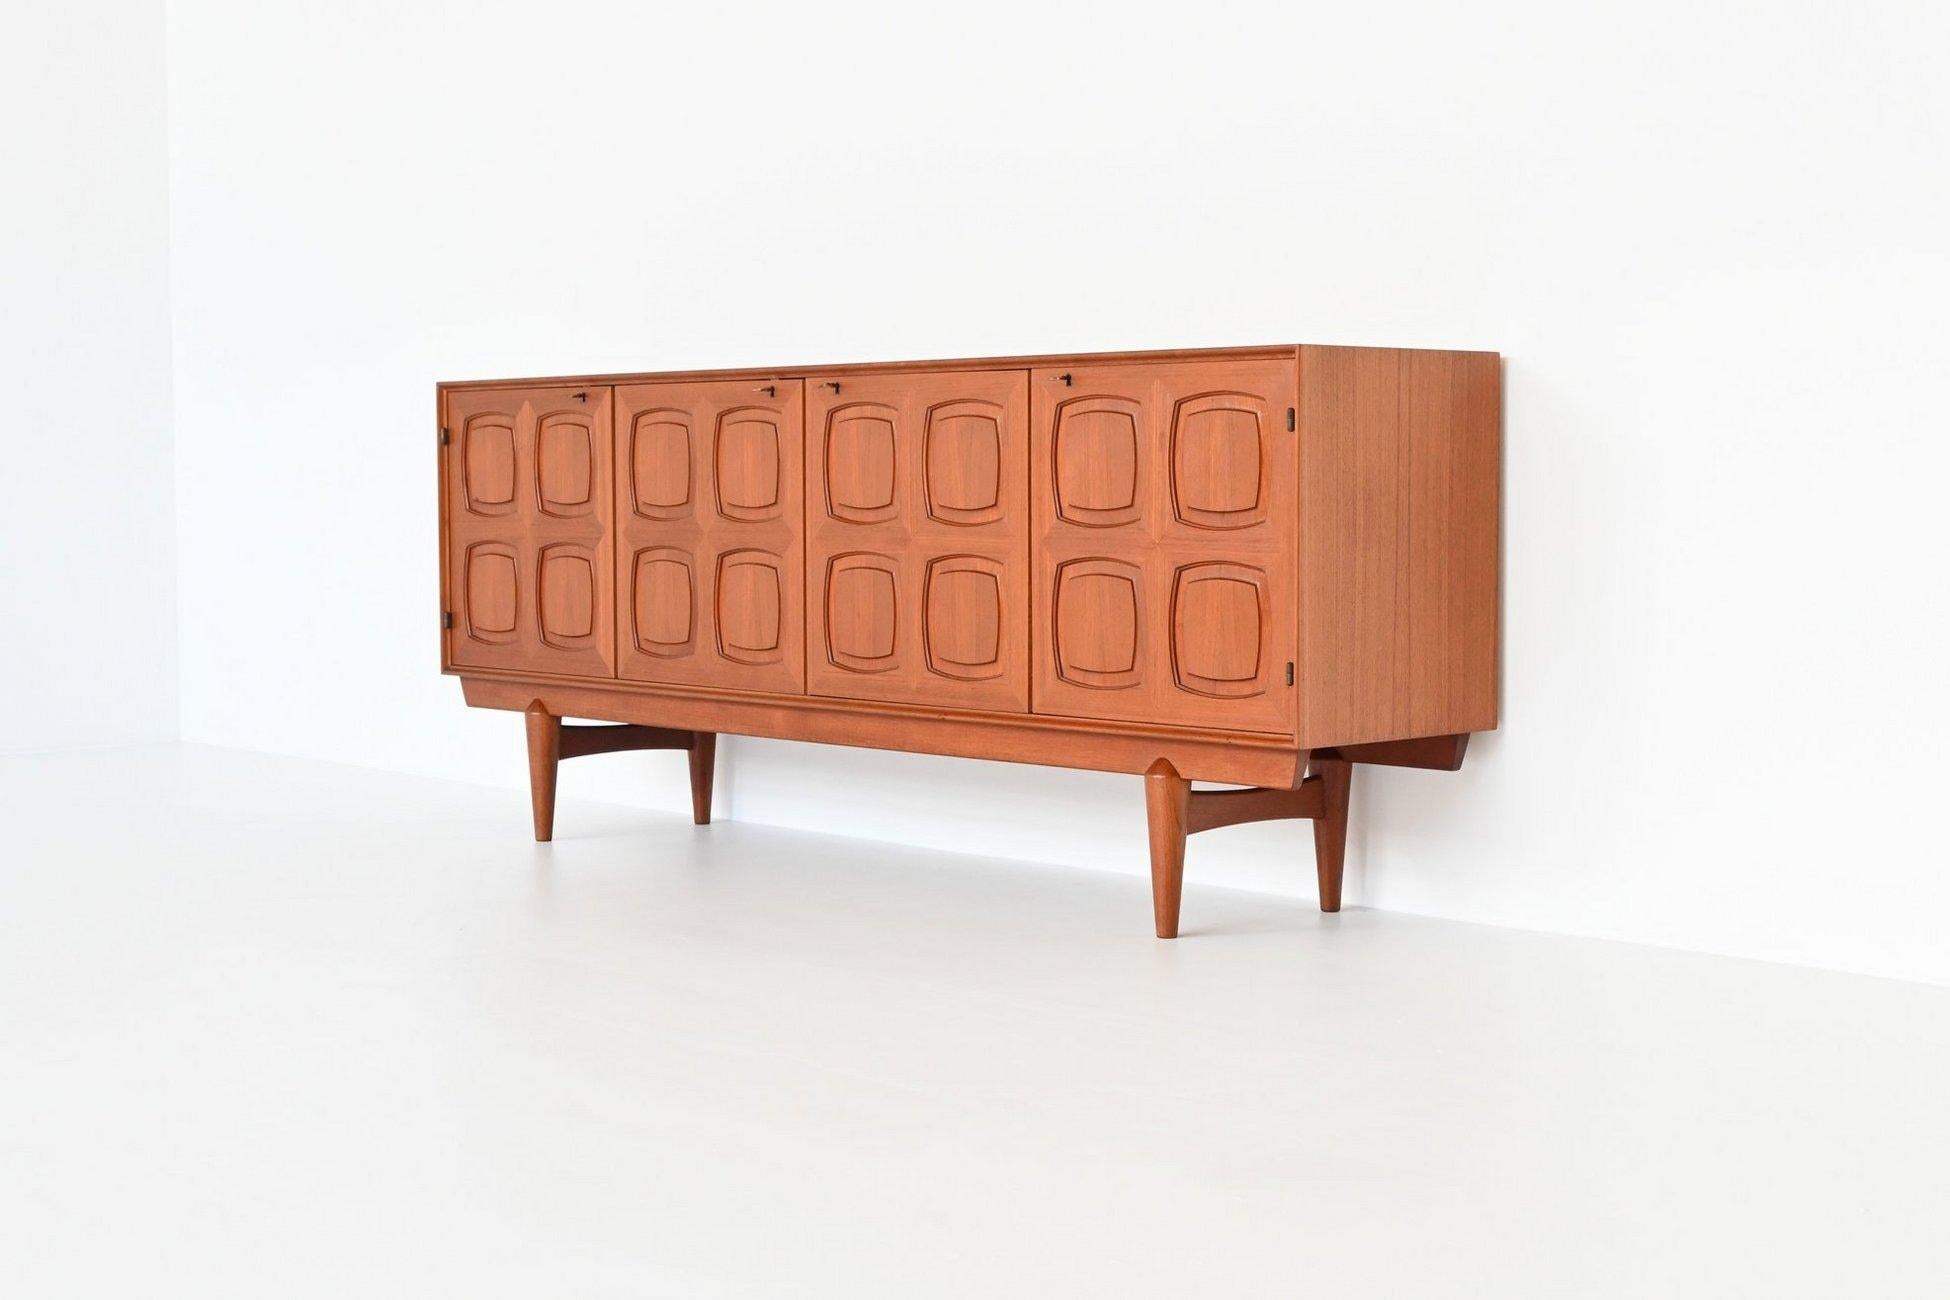 Beautiful and very rare sideboard designed by Rolf Rastad & Arnold Relling for Gustav Bahus, Norway 1960. This high quality Scandinavian cabinet is executed in teak wood supported by a solid frame. It has four massive doors with a very nice graphic